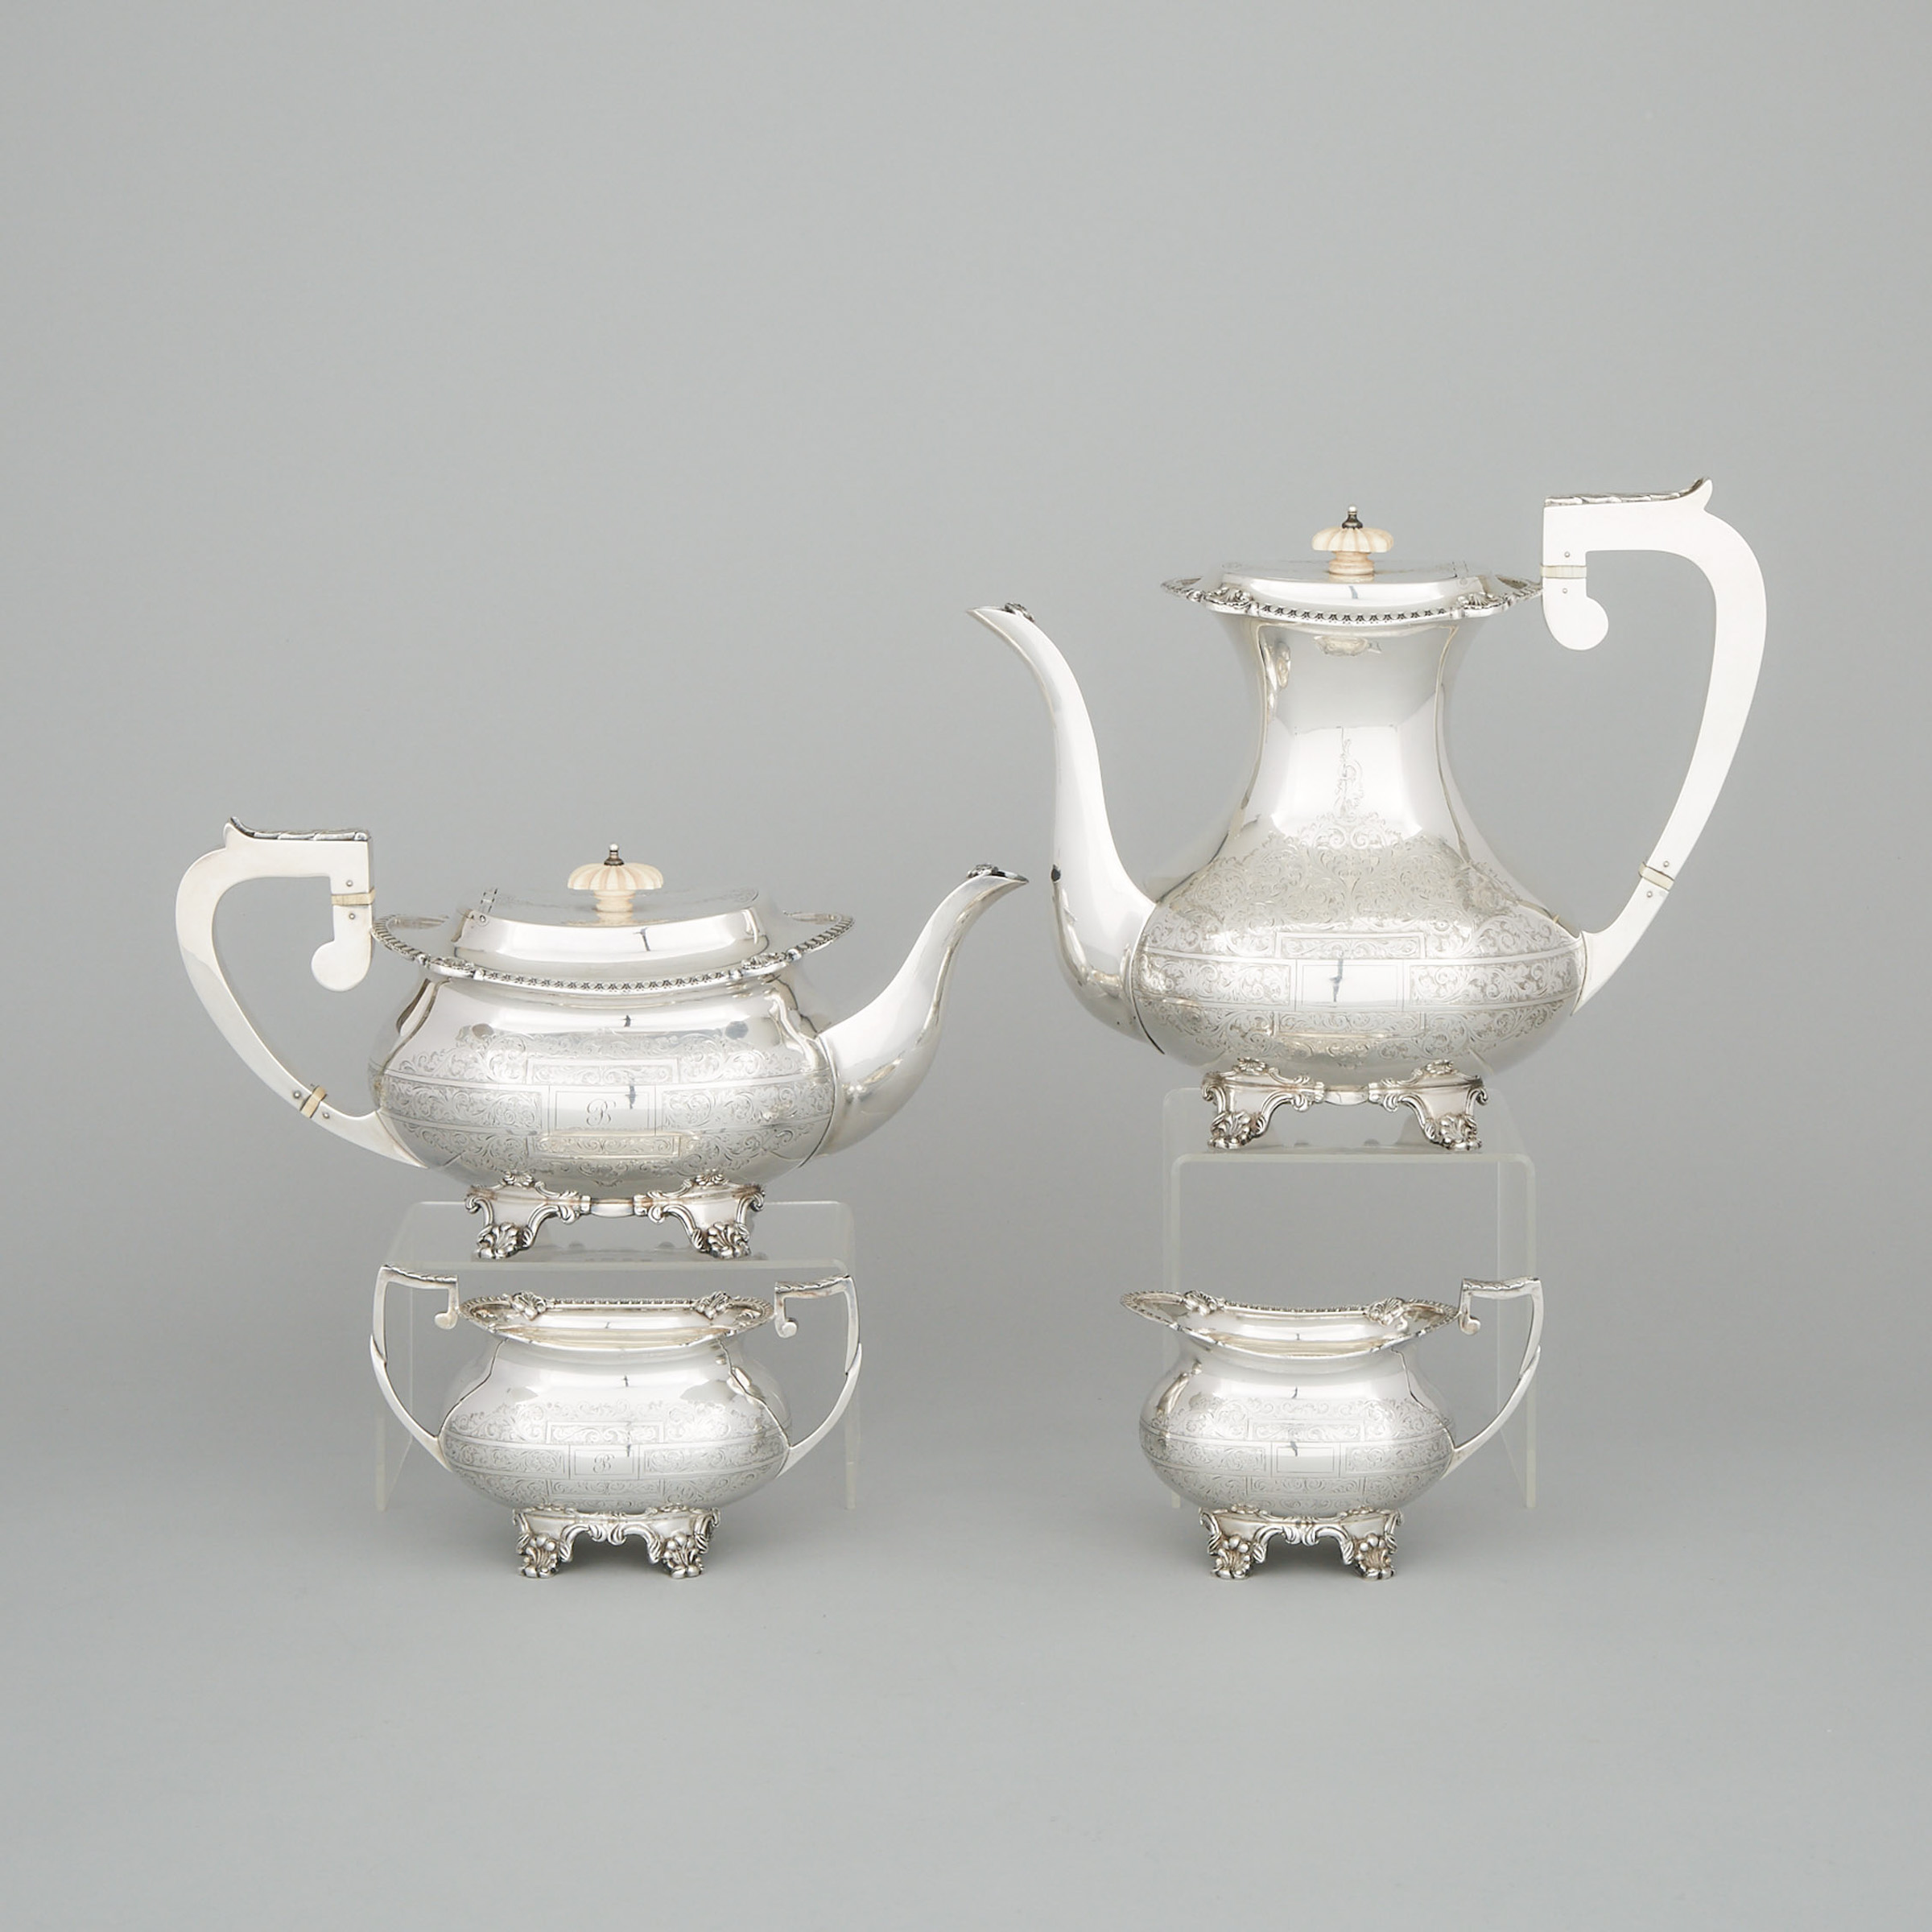 English Silver Tea and Coffee Service, Charles S. Green & Co., Birmingham, 1958